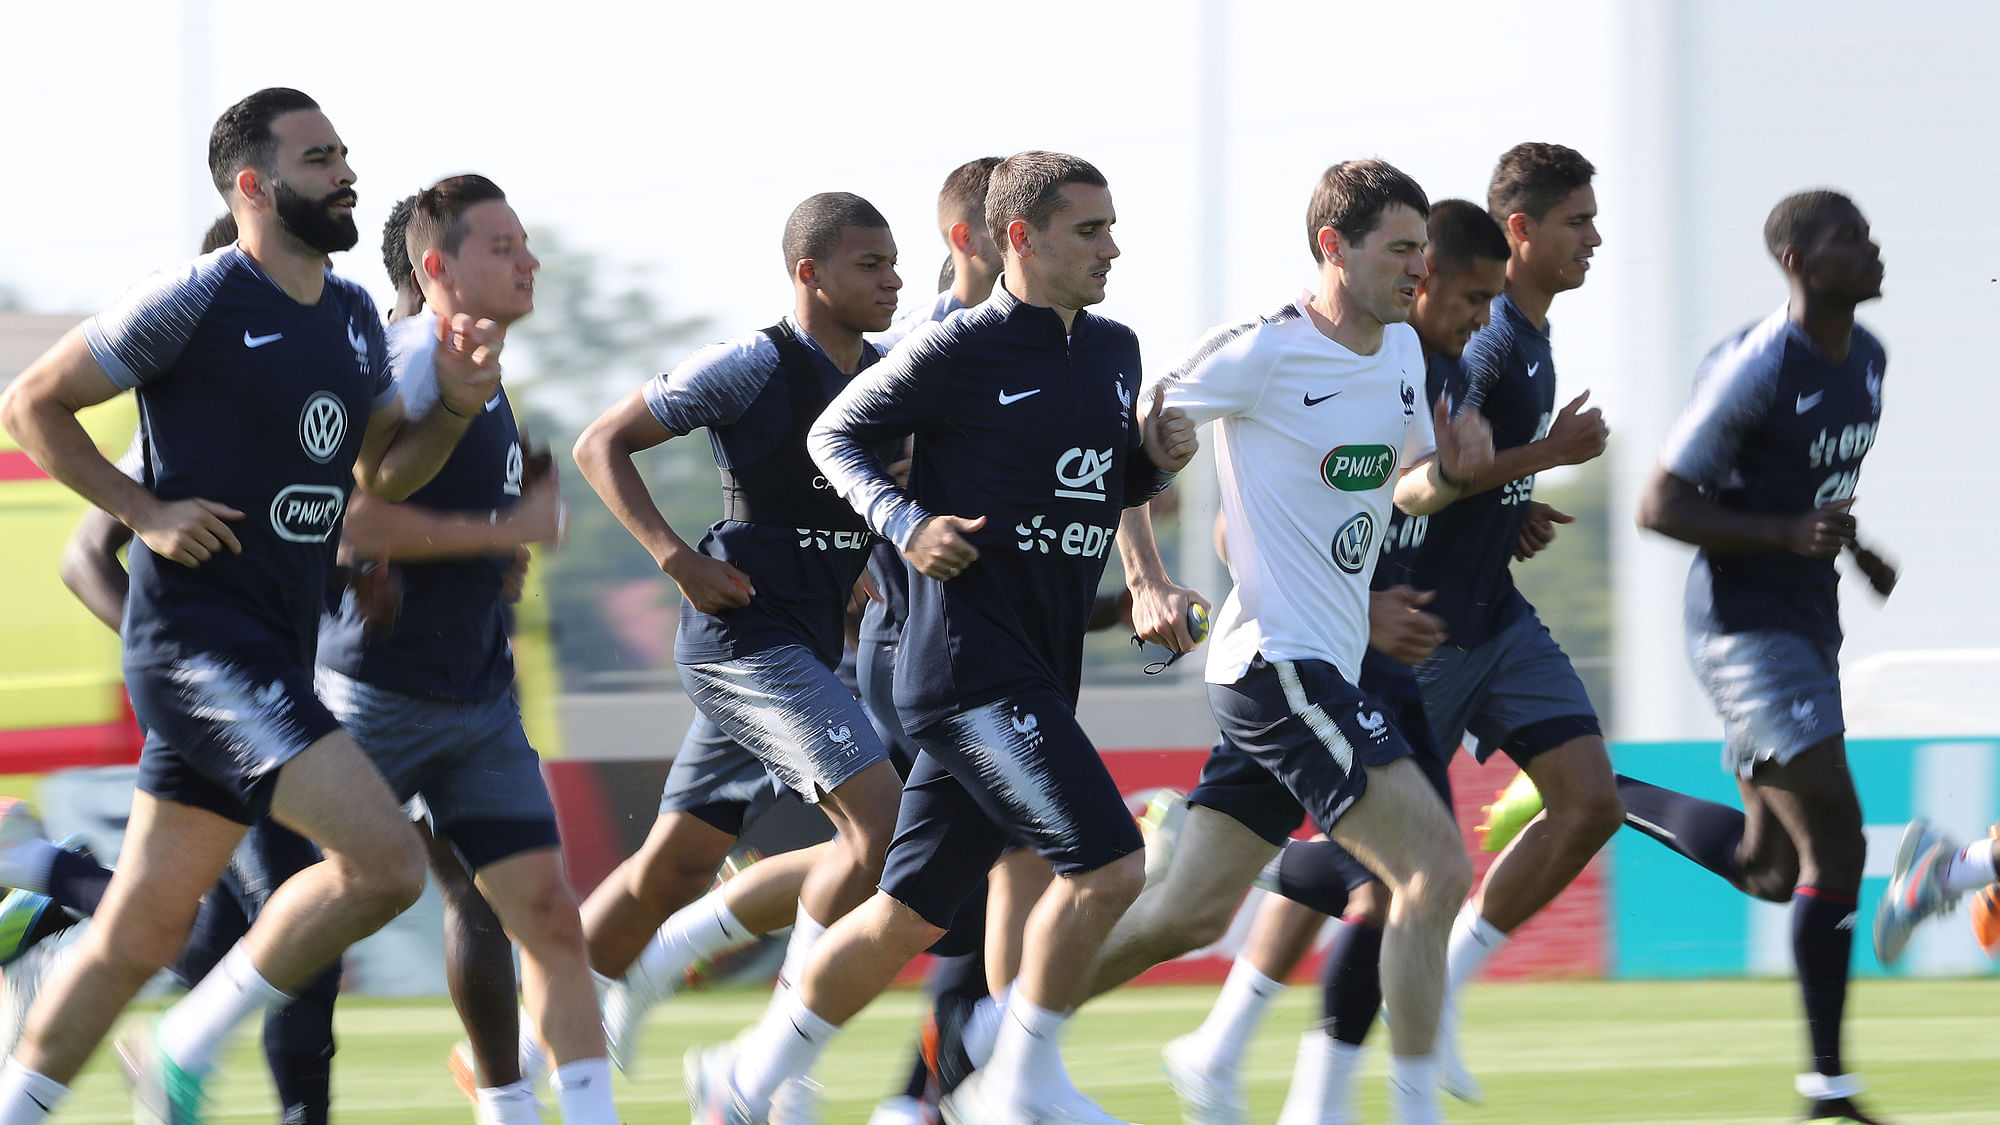 France’s Antoine Griezmann runs on the field during a training session.